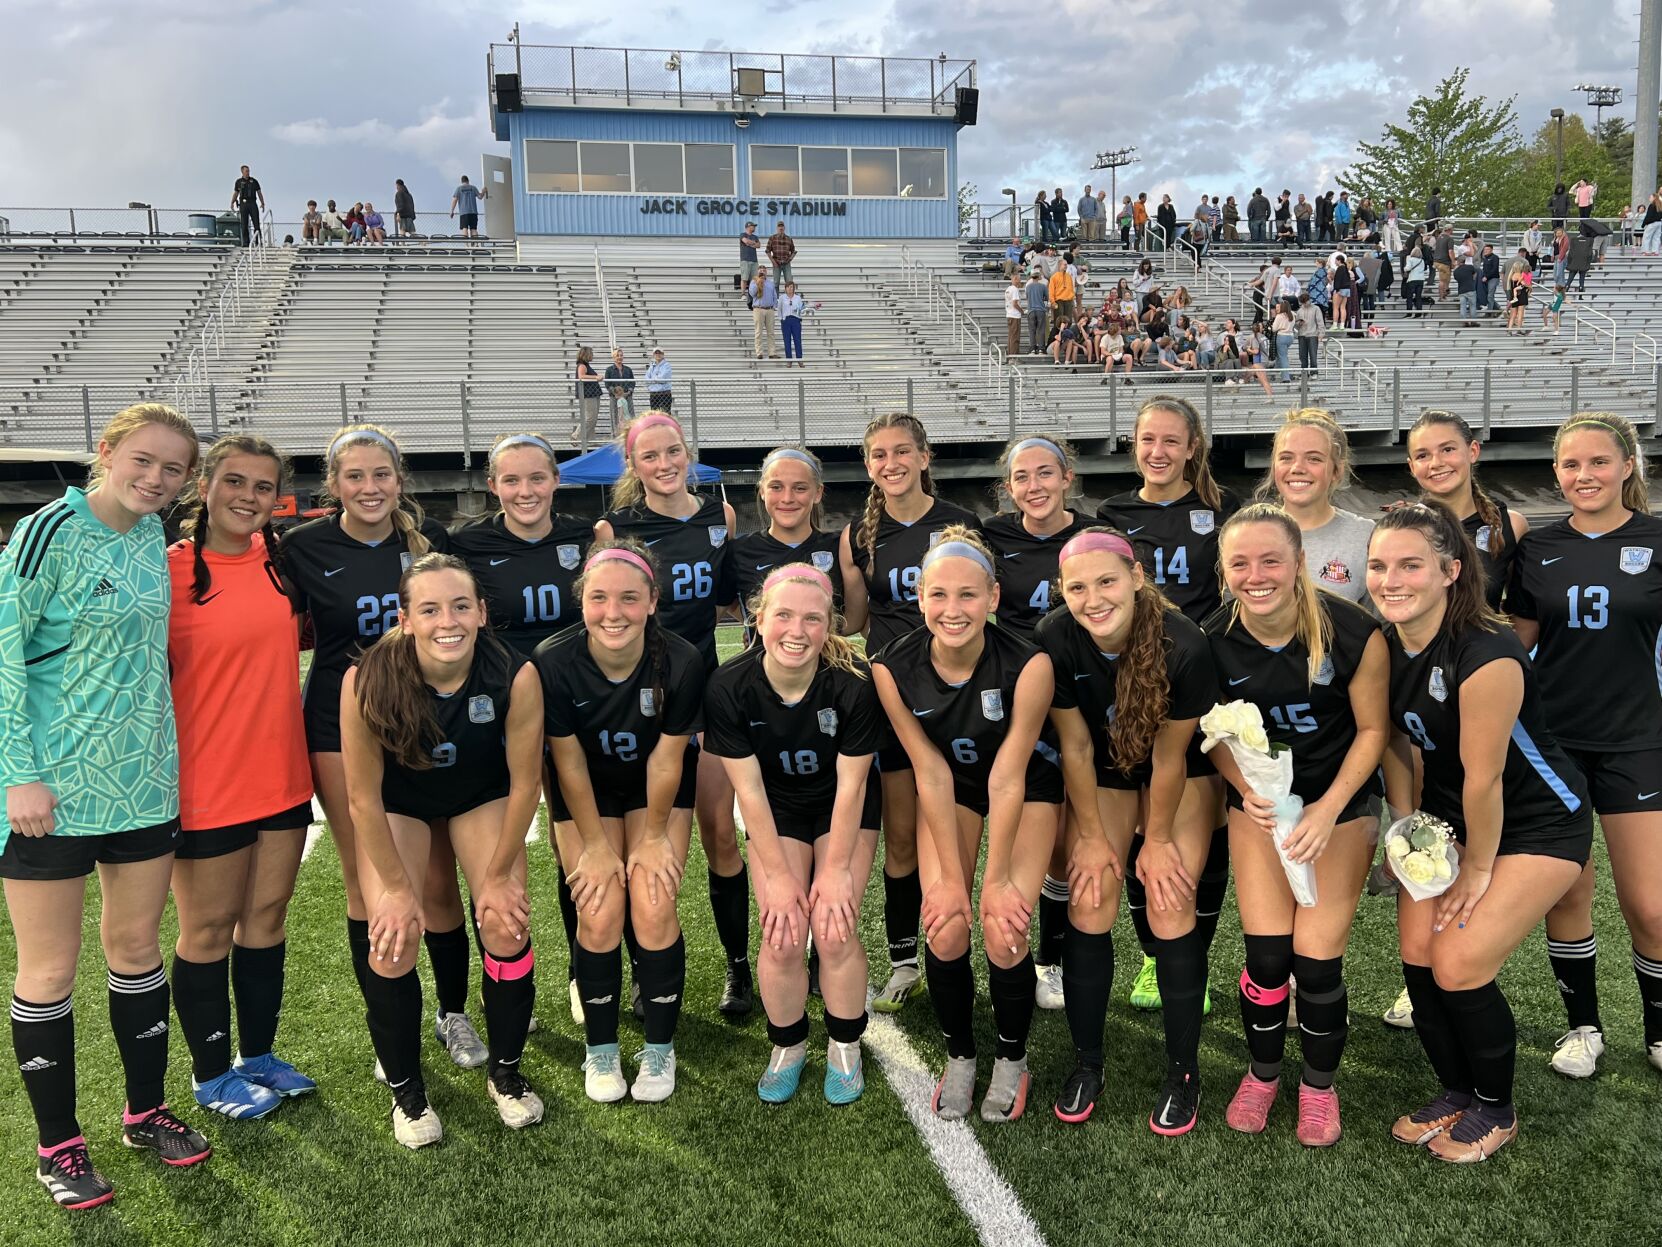 Lady Pioneers garner top seed for girls state soccer playoffs